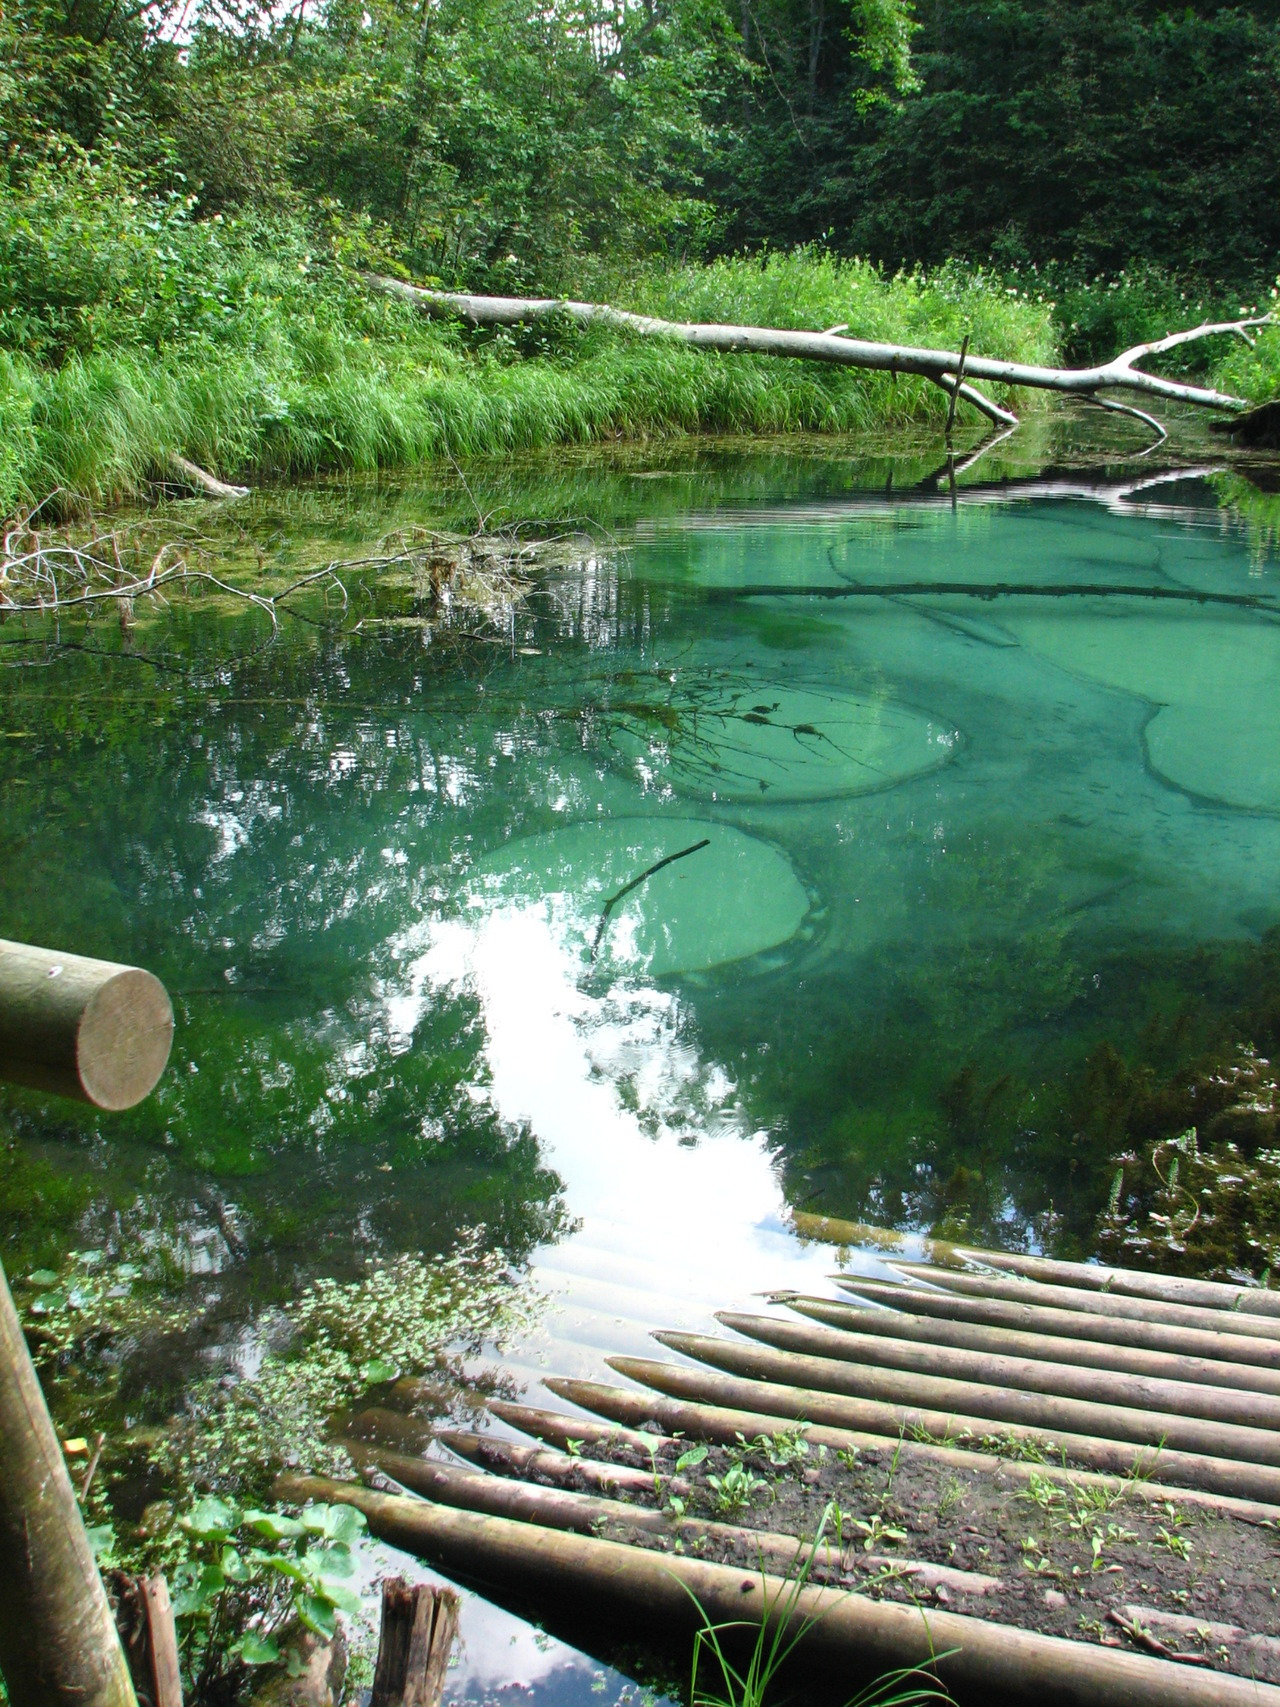 The Blue Springs of Saula, freshwater springs located in Harju County, northern Estonia.